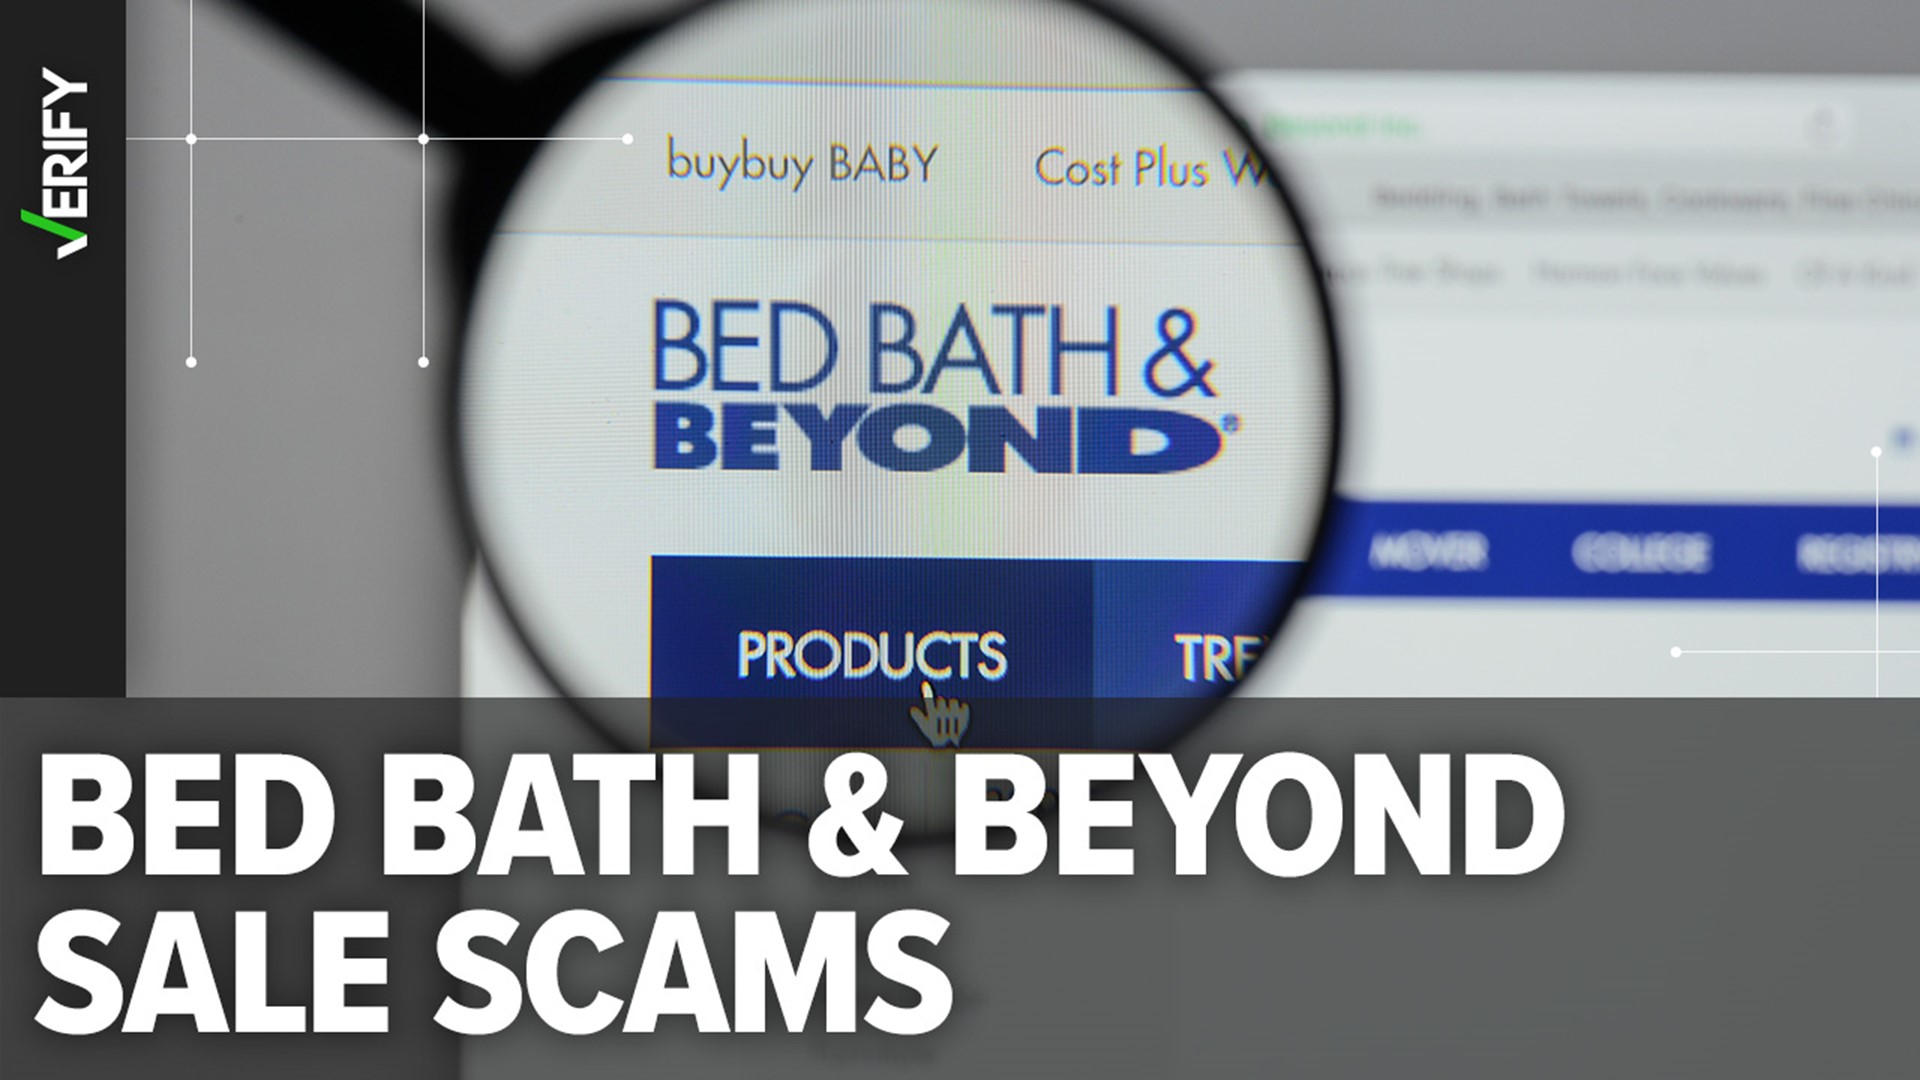 Bed Bath & Beyond kicks off store closing sales after filing for